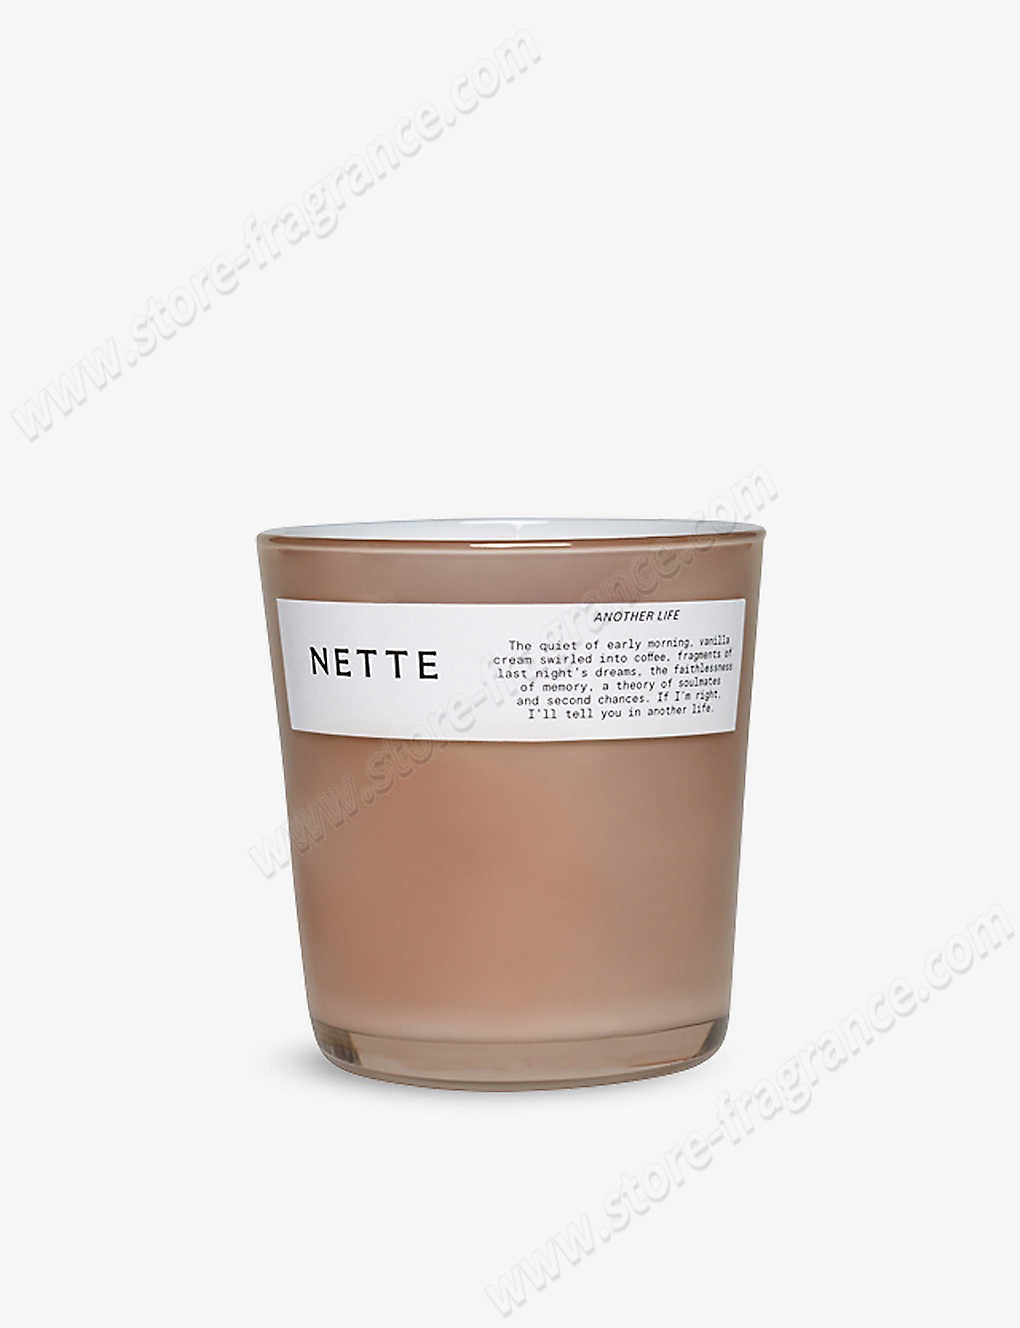 NETTE/Another Life scented candle 20.6oz ✿ Discount Store - NETTE/Another Life scented candle 20.6oz ✿ Discount Store